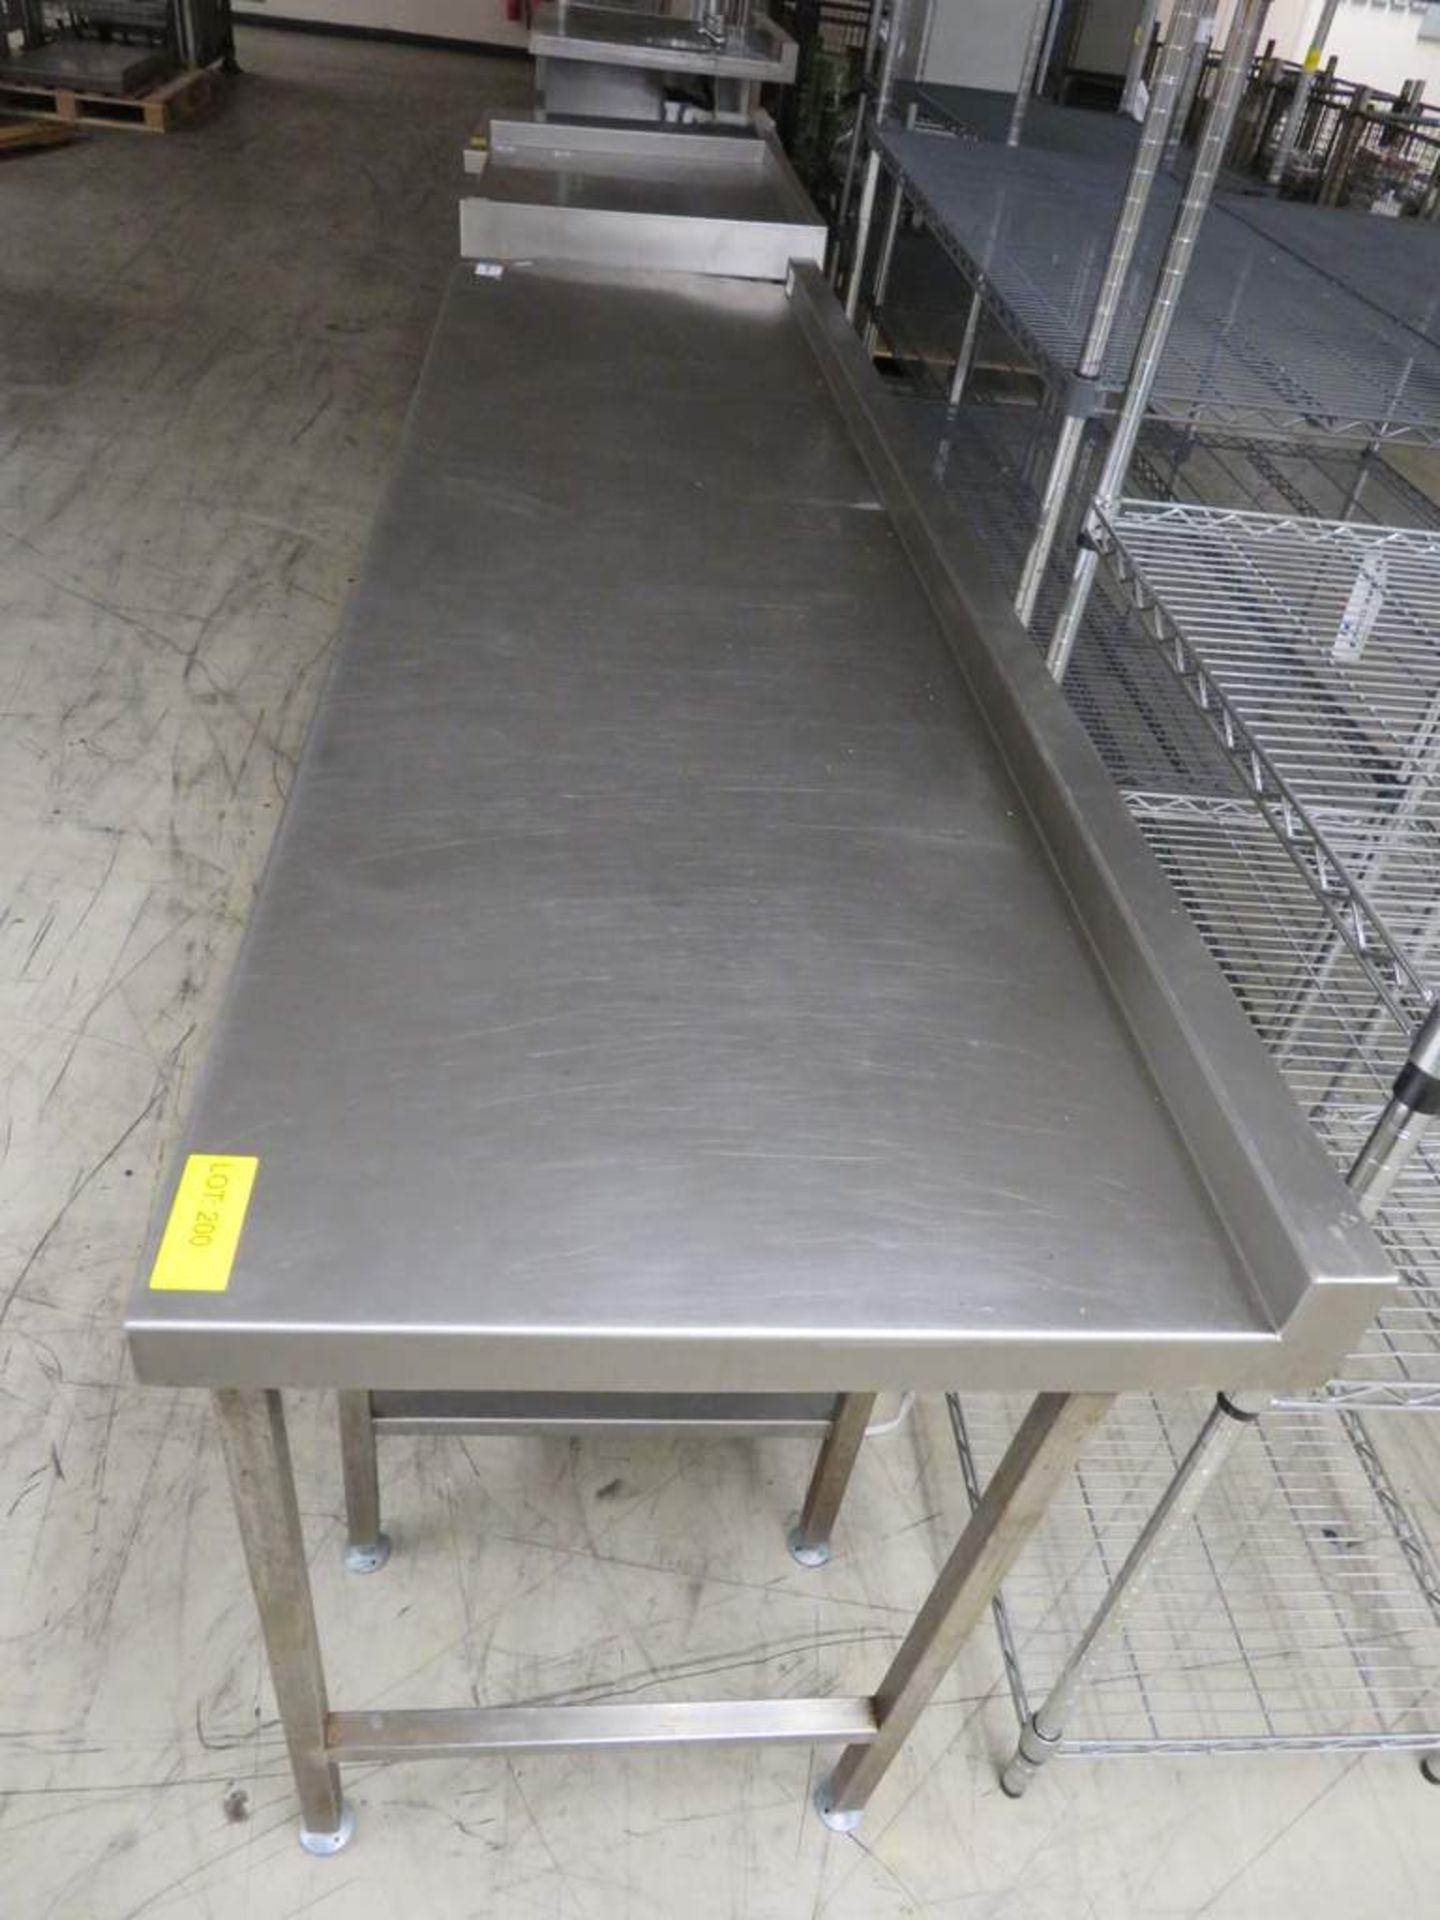 Stainless steel preparation Table - Image 2 of 4